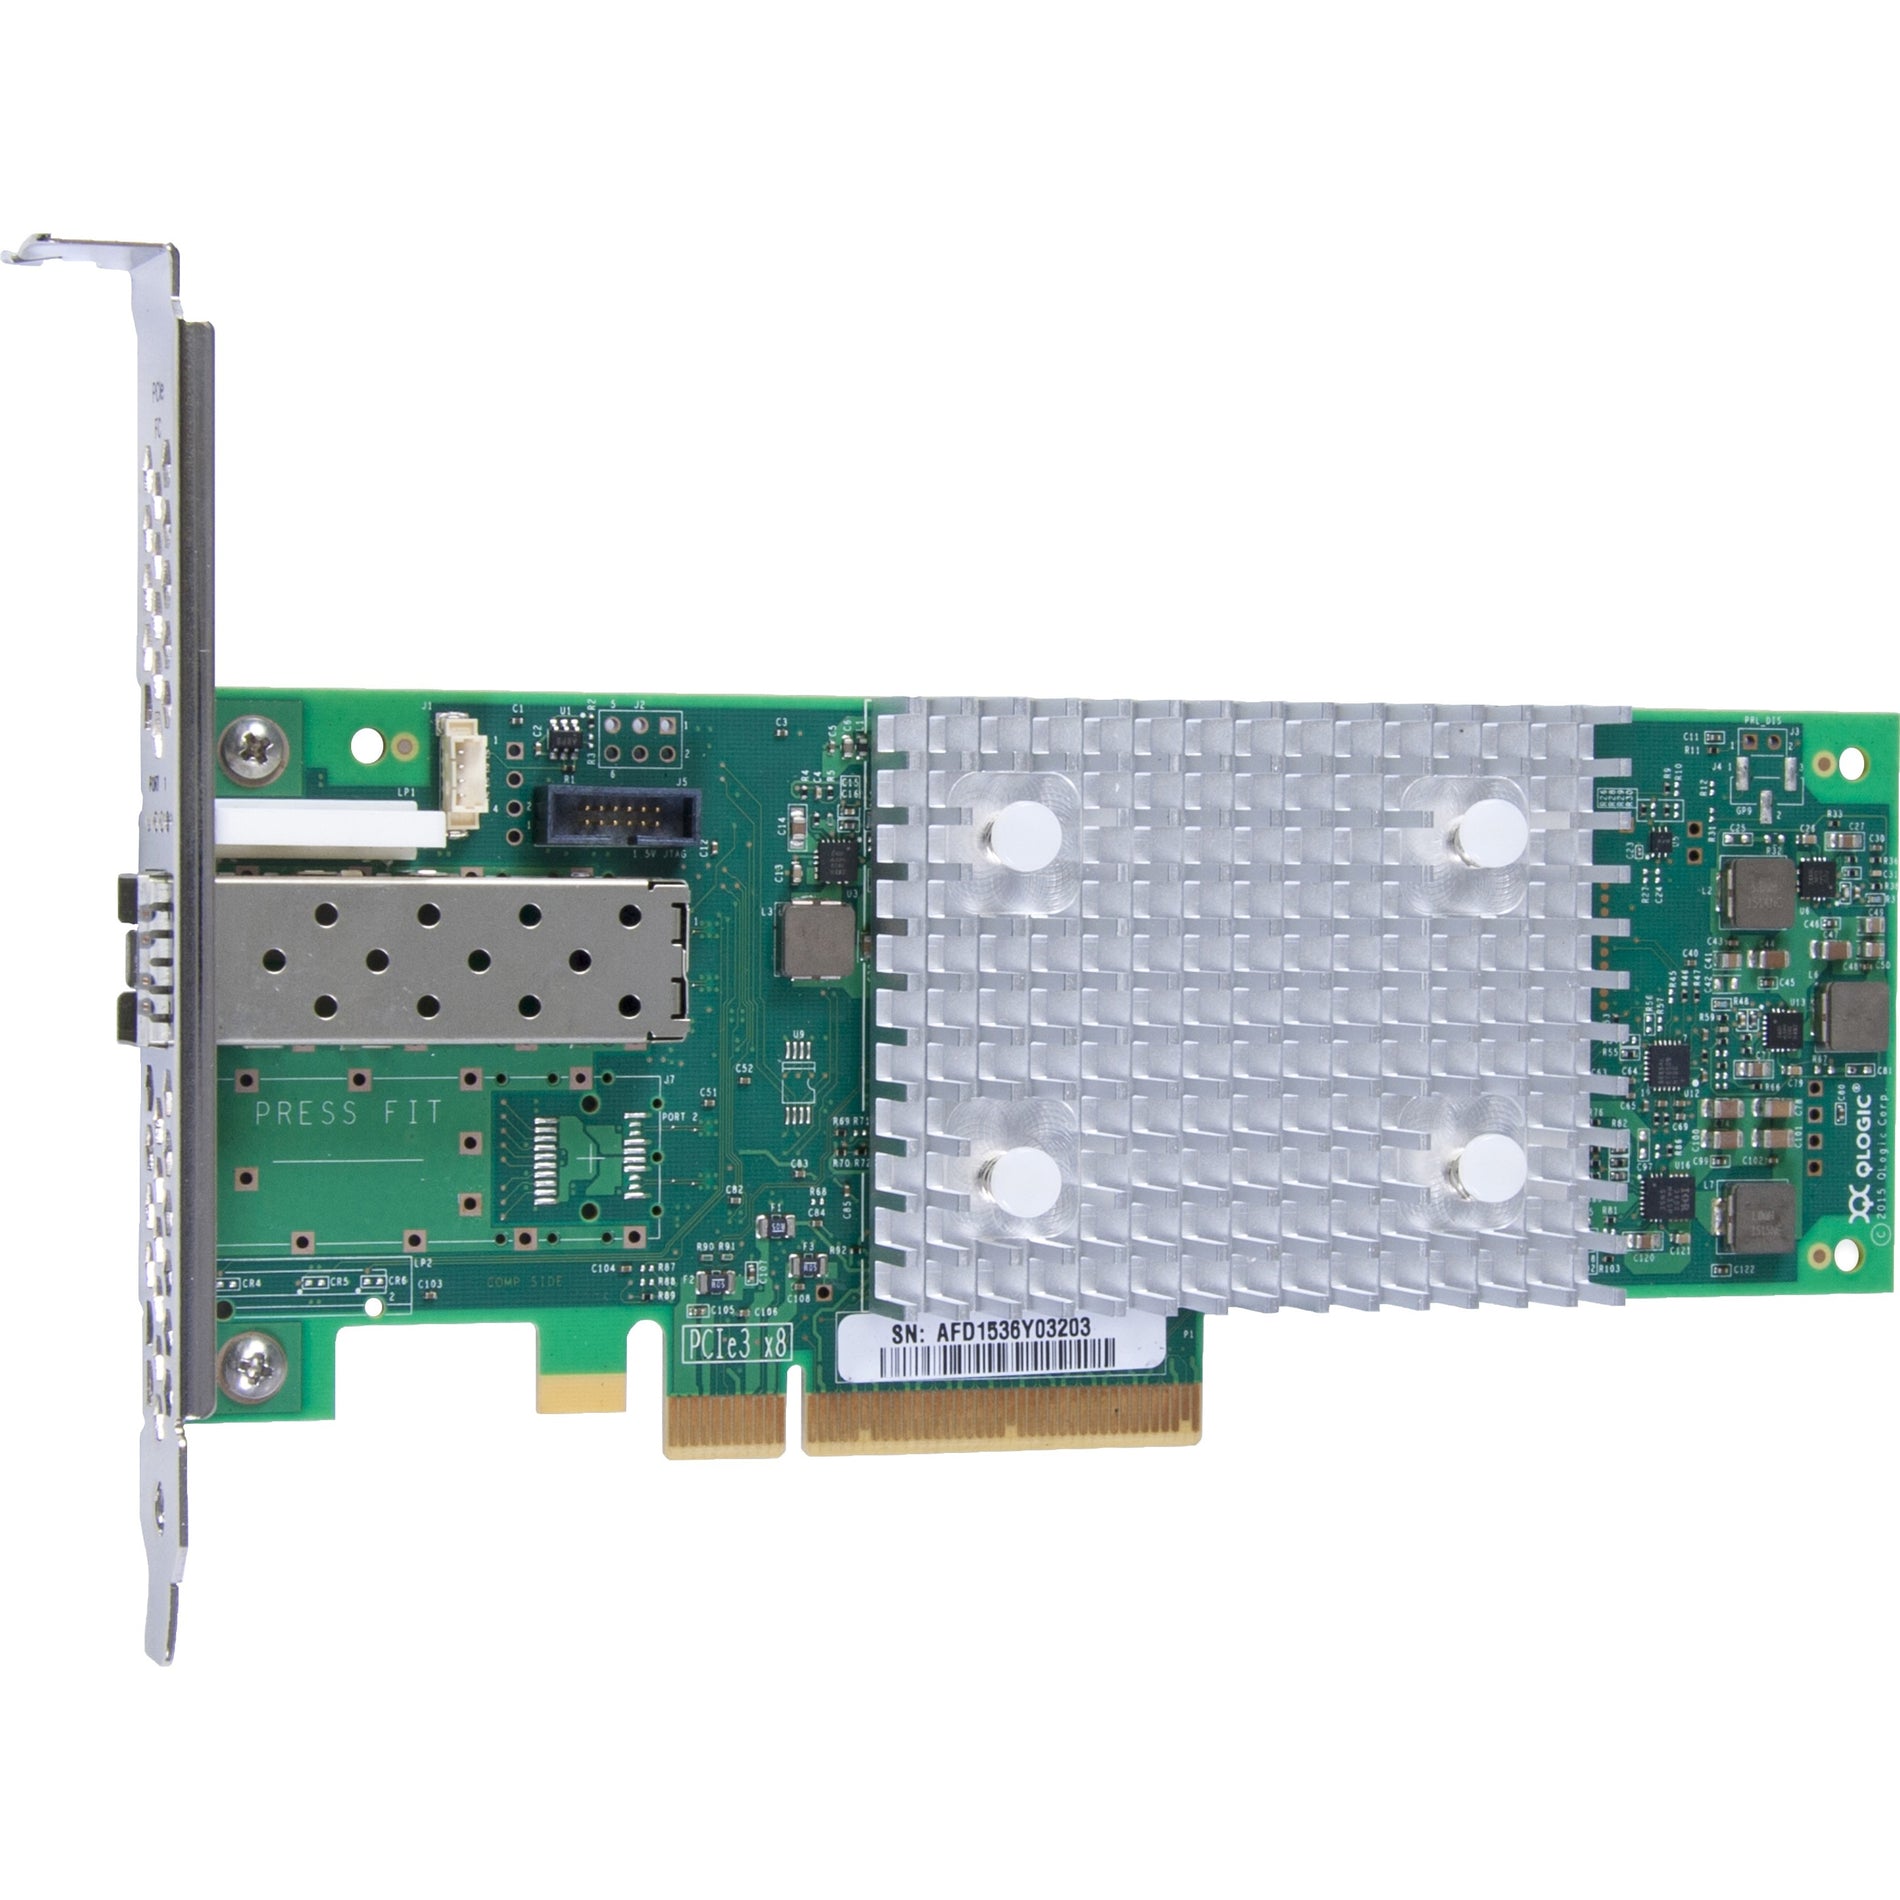 HPE P9D93A StoreFabric SN1100Q 16Gb Single Port Fibre Channel Host Bus Adapter, High-Speed Data Transfer for Enhanced Connectivity